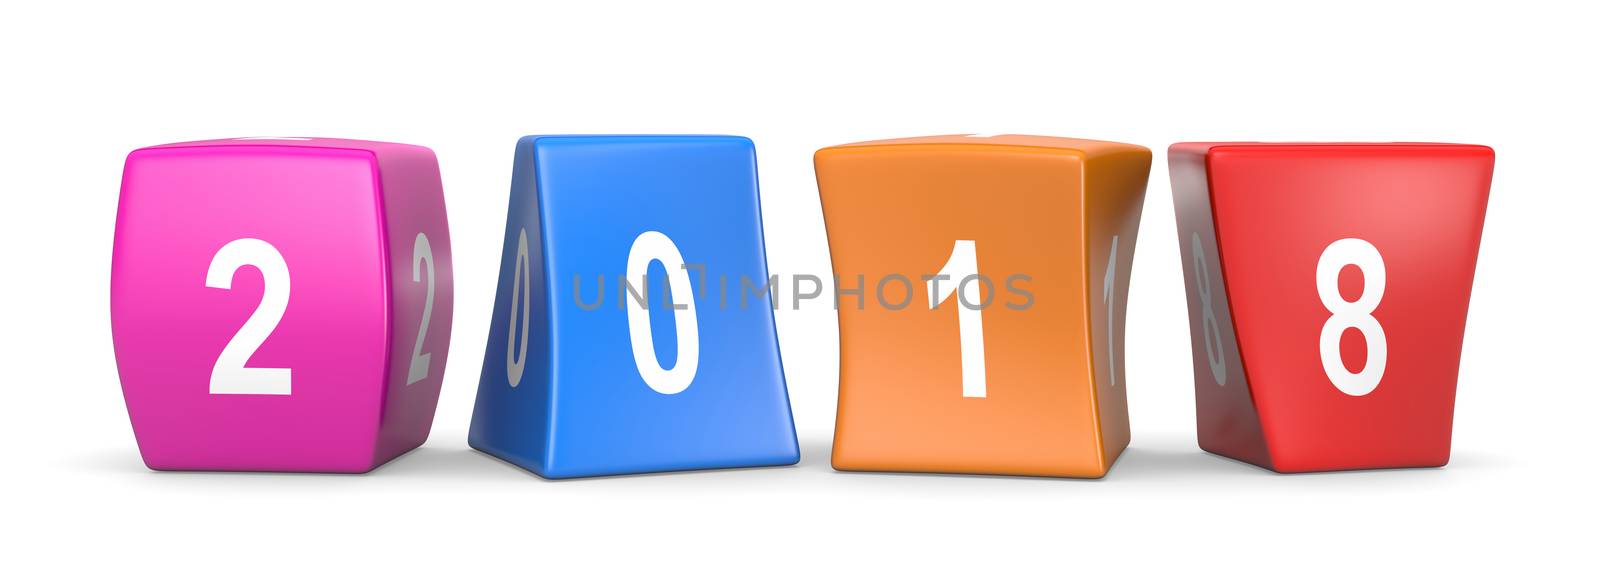 2018 White Text on Colorful Deformed Funny Cubes 3D Illustration on White Background